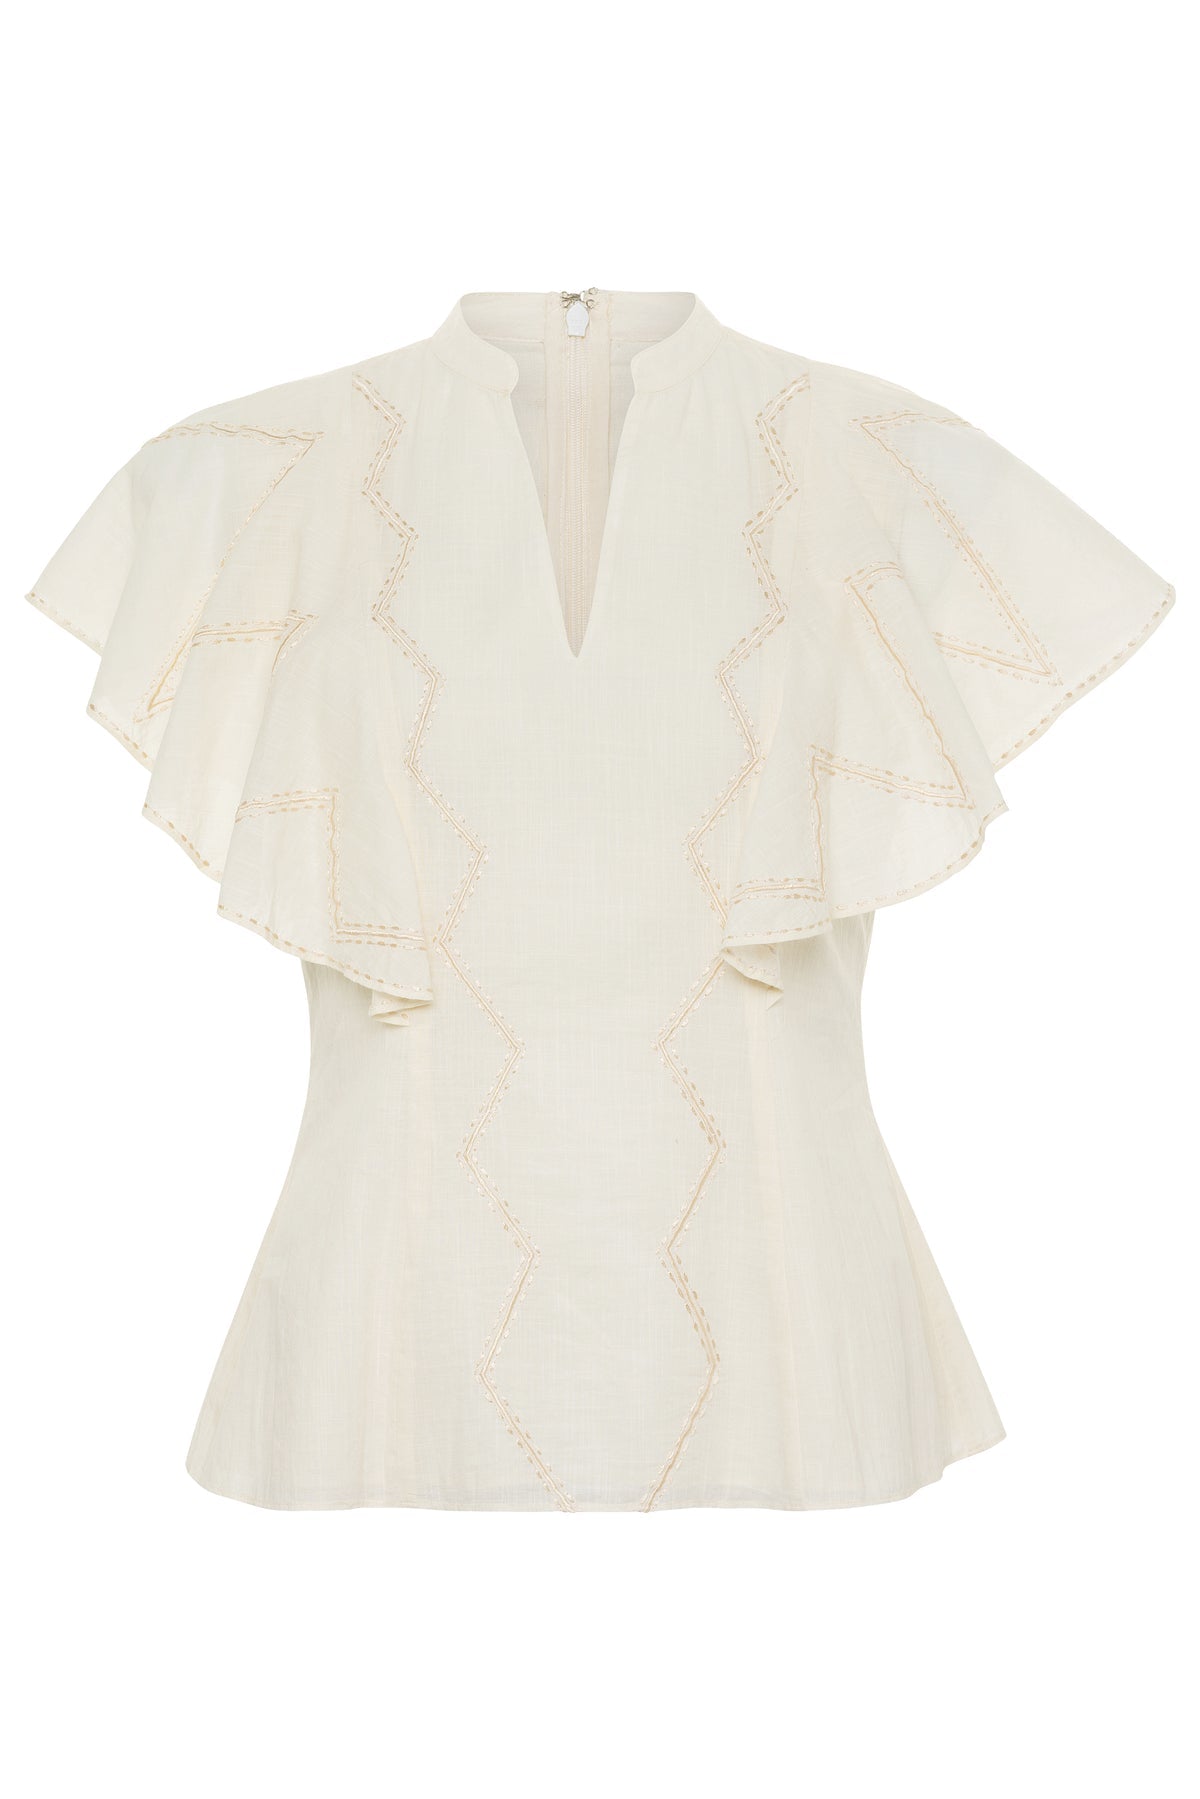 Anna Cate | Collins Top | Ivory